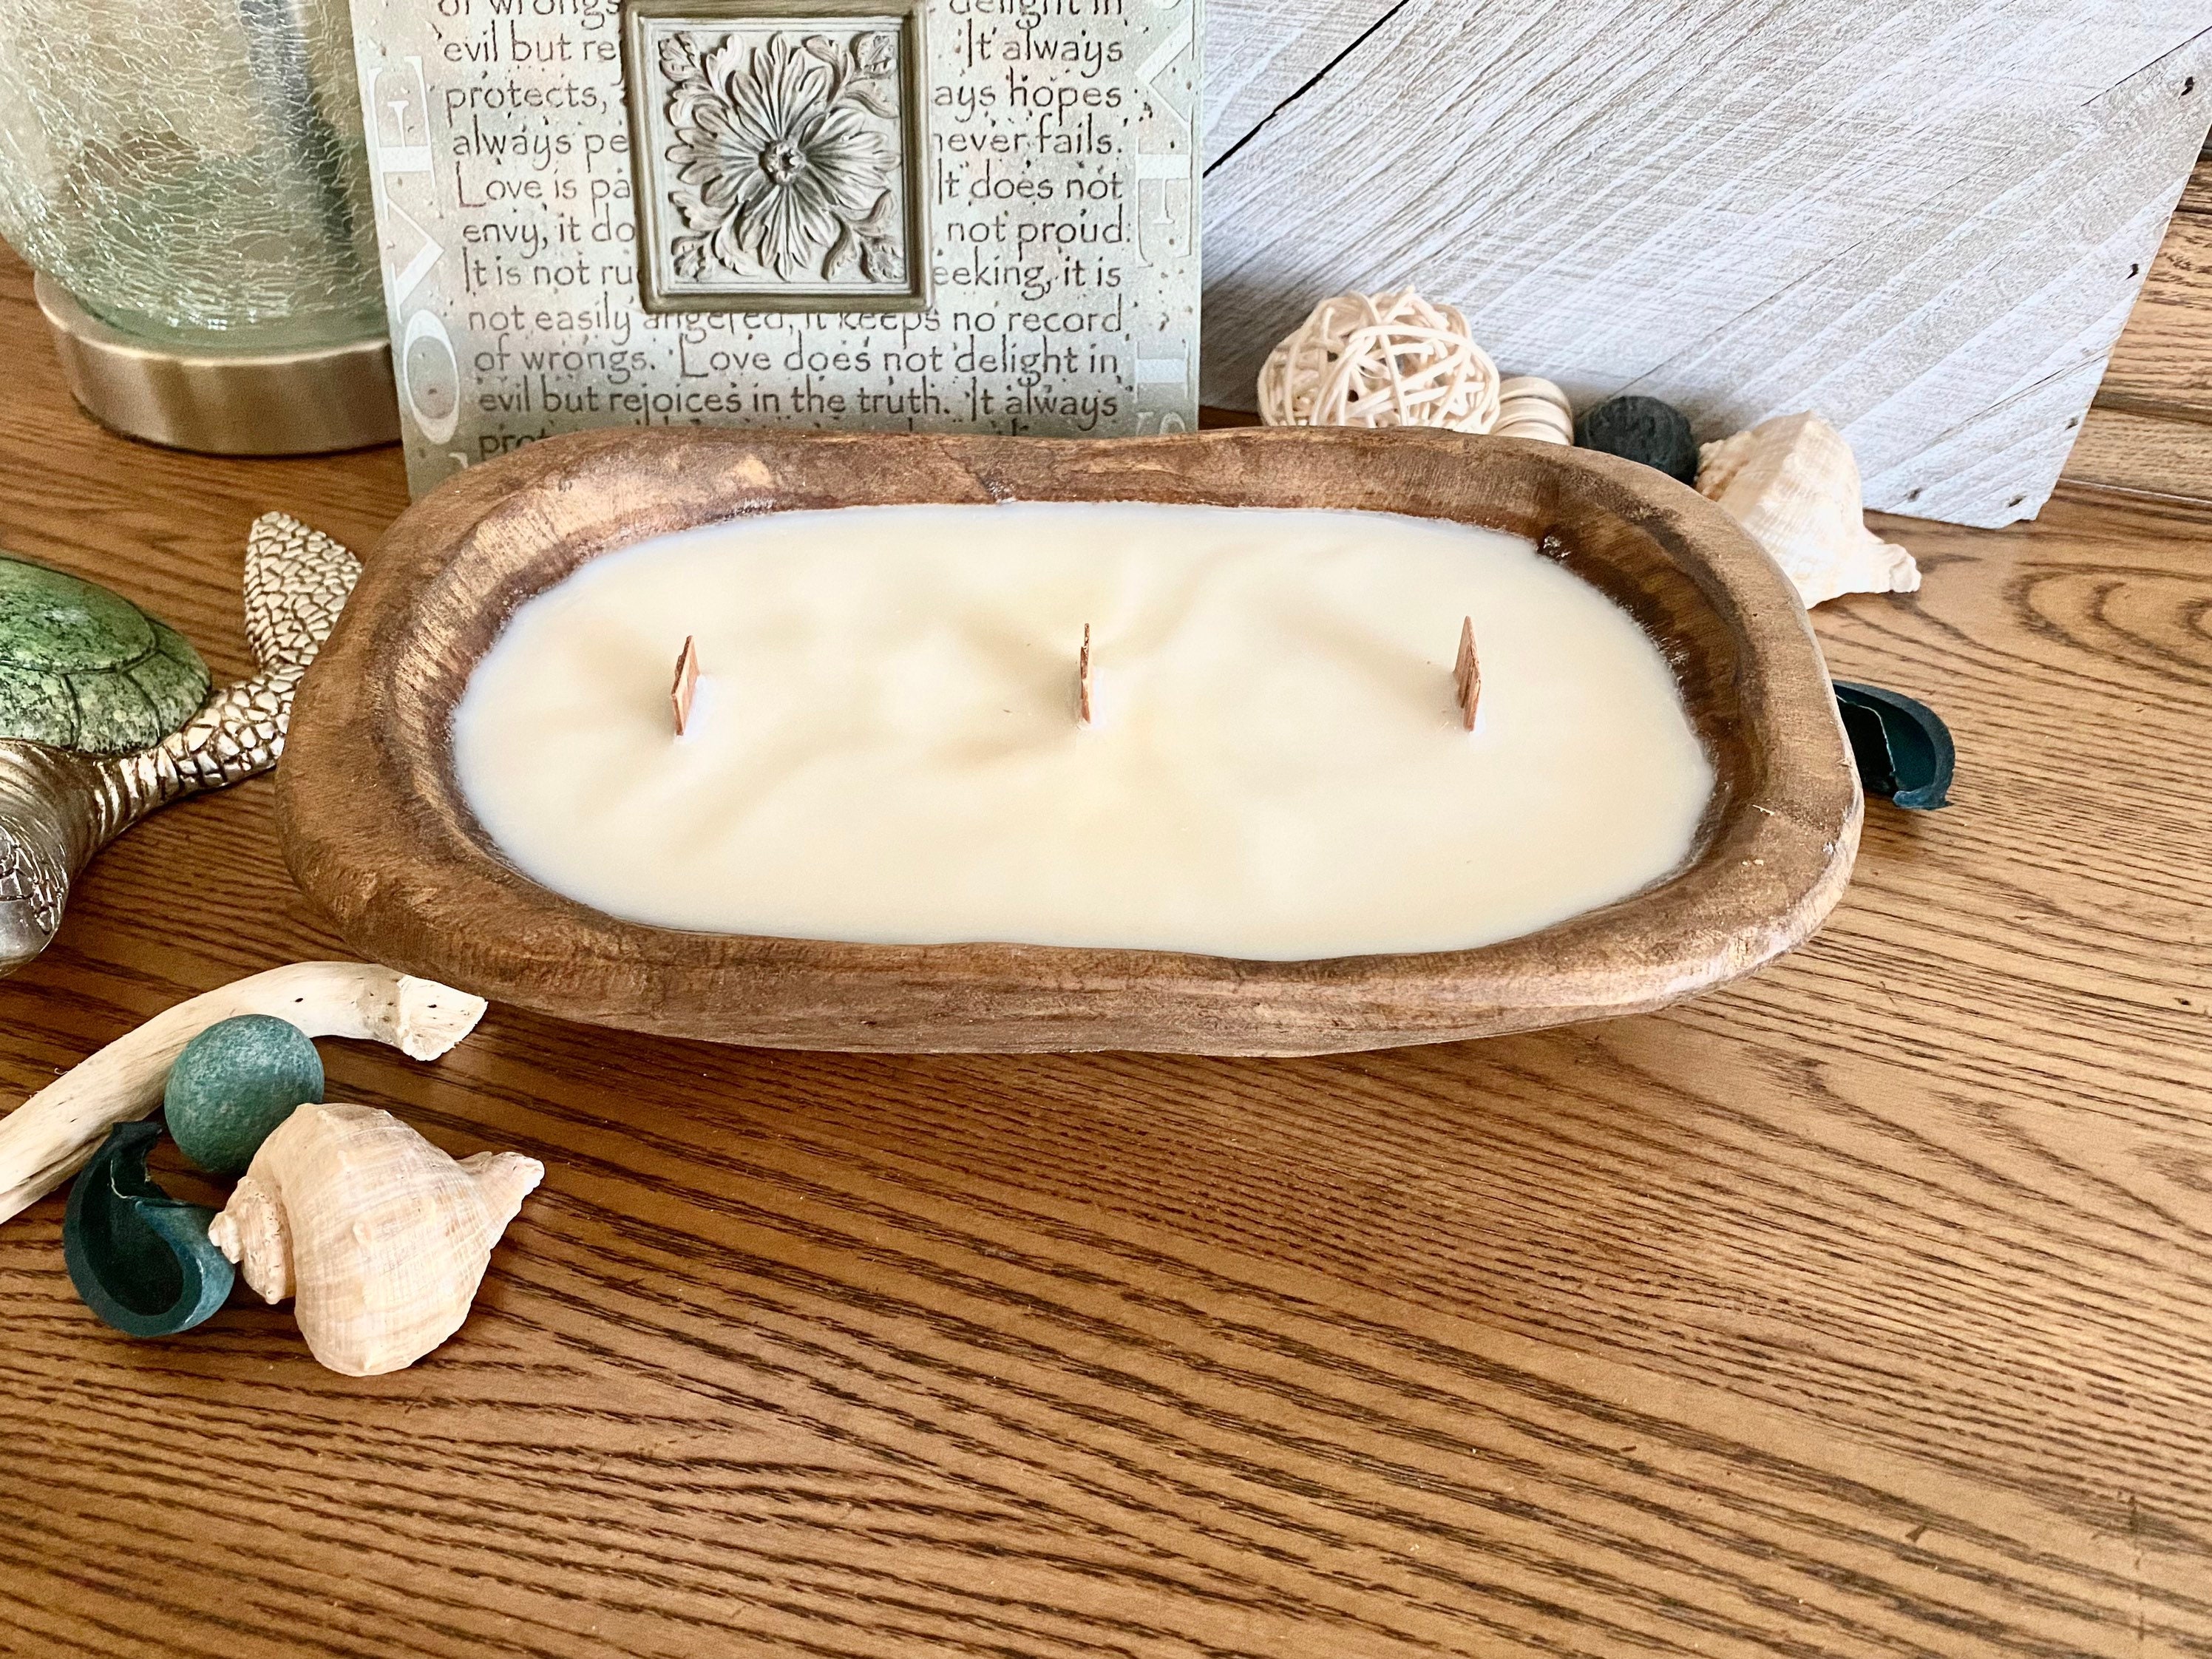 WOODEN DOUGH BOWL CANDLE - CUSTOM 3-WICK